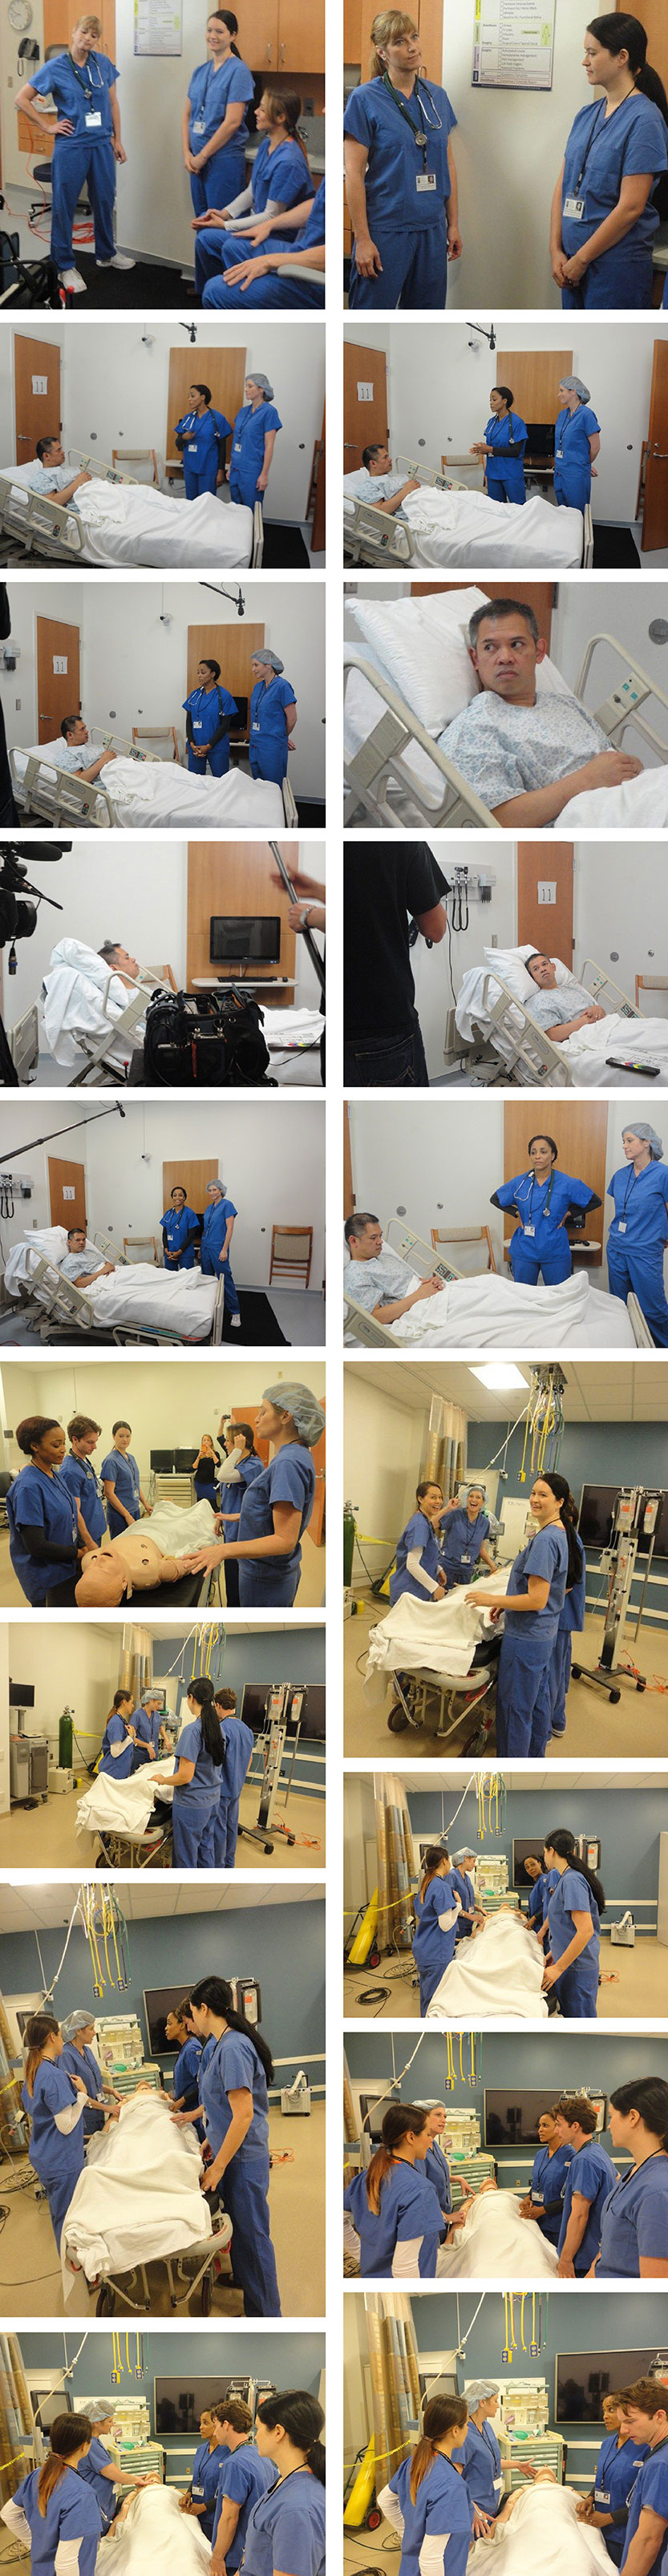 Simulation Center Handover Project collage